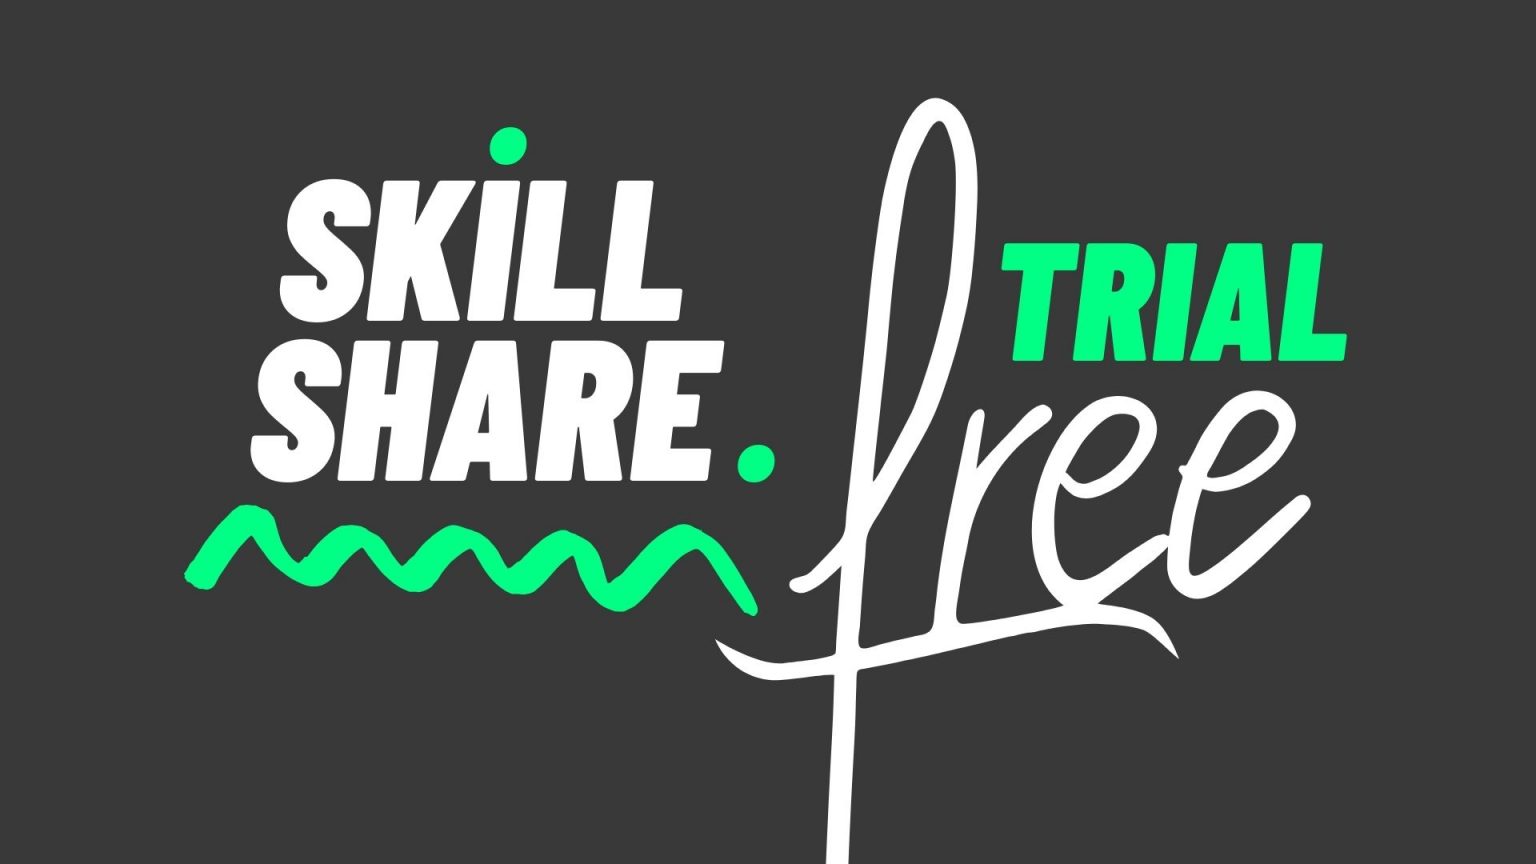 How to Get Skillshare Free Trial